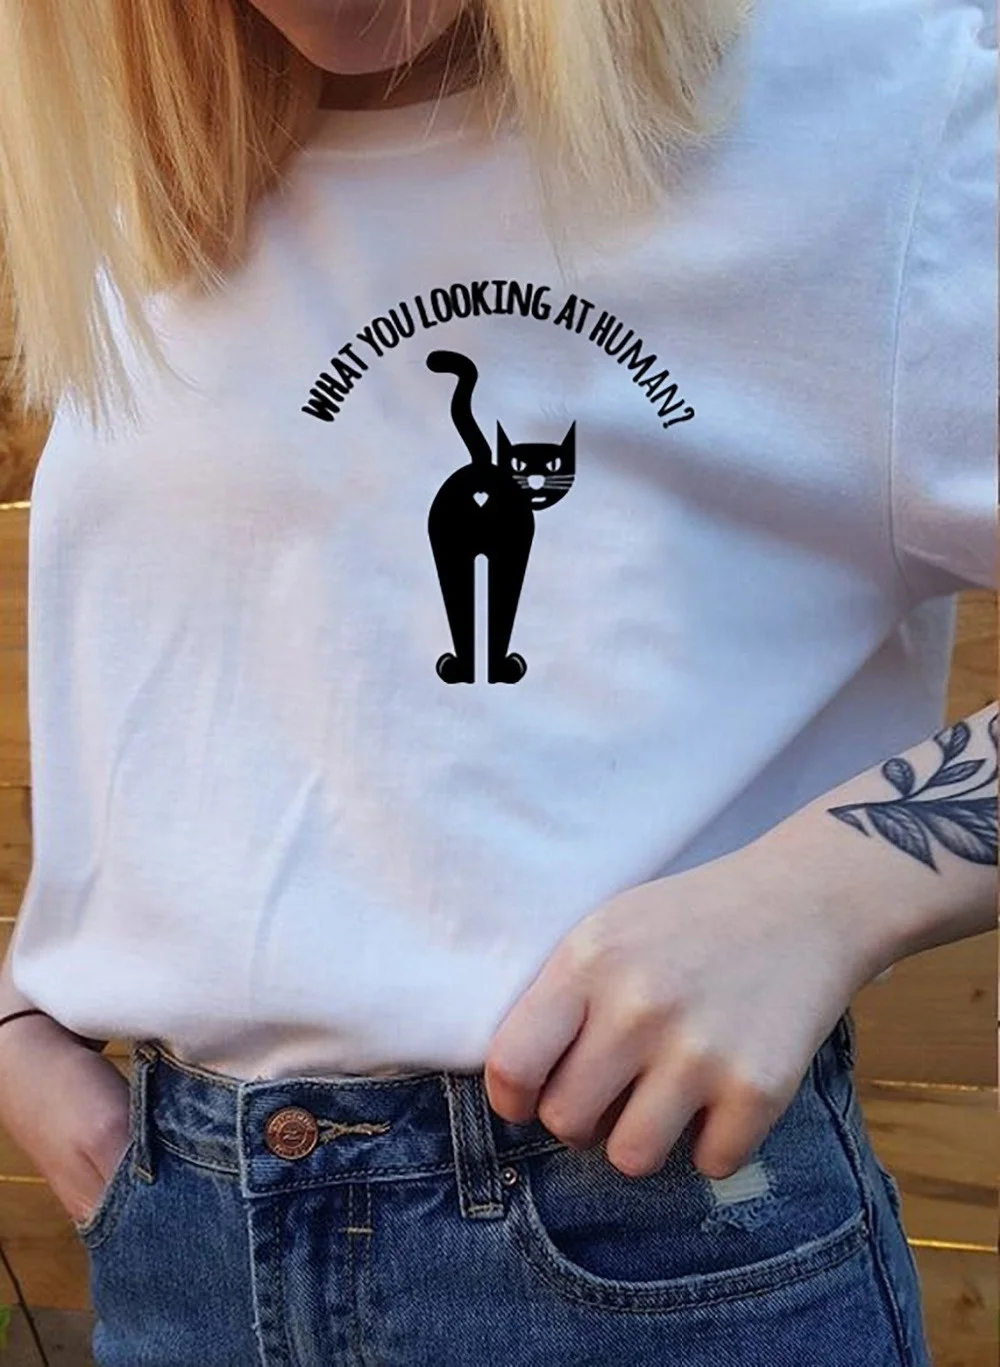 

Fashionshow-JF What You Looking at Human Unisex T-Shirt Cotton Black Cat Street Style Tops Tumblr Tees